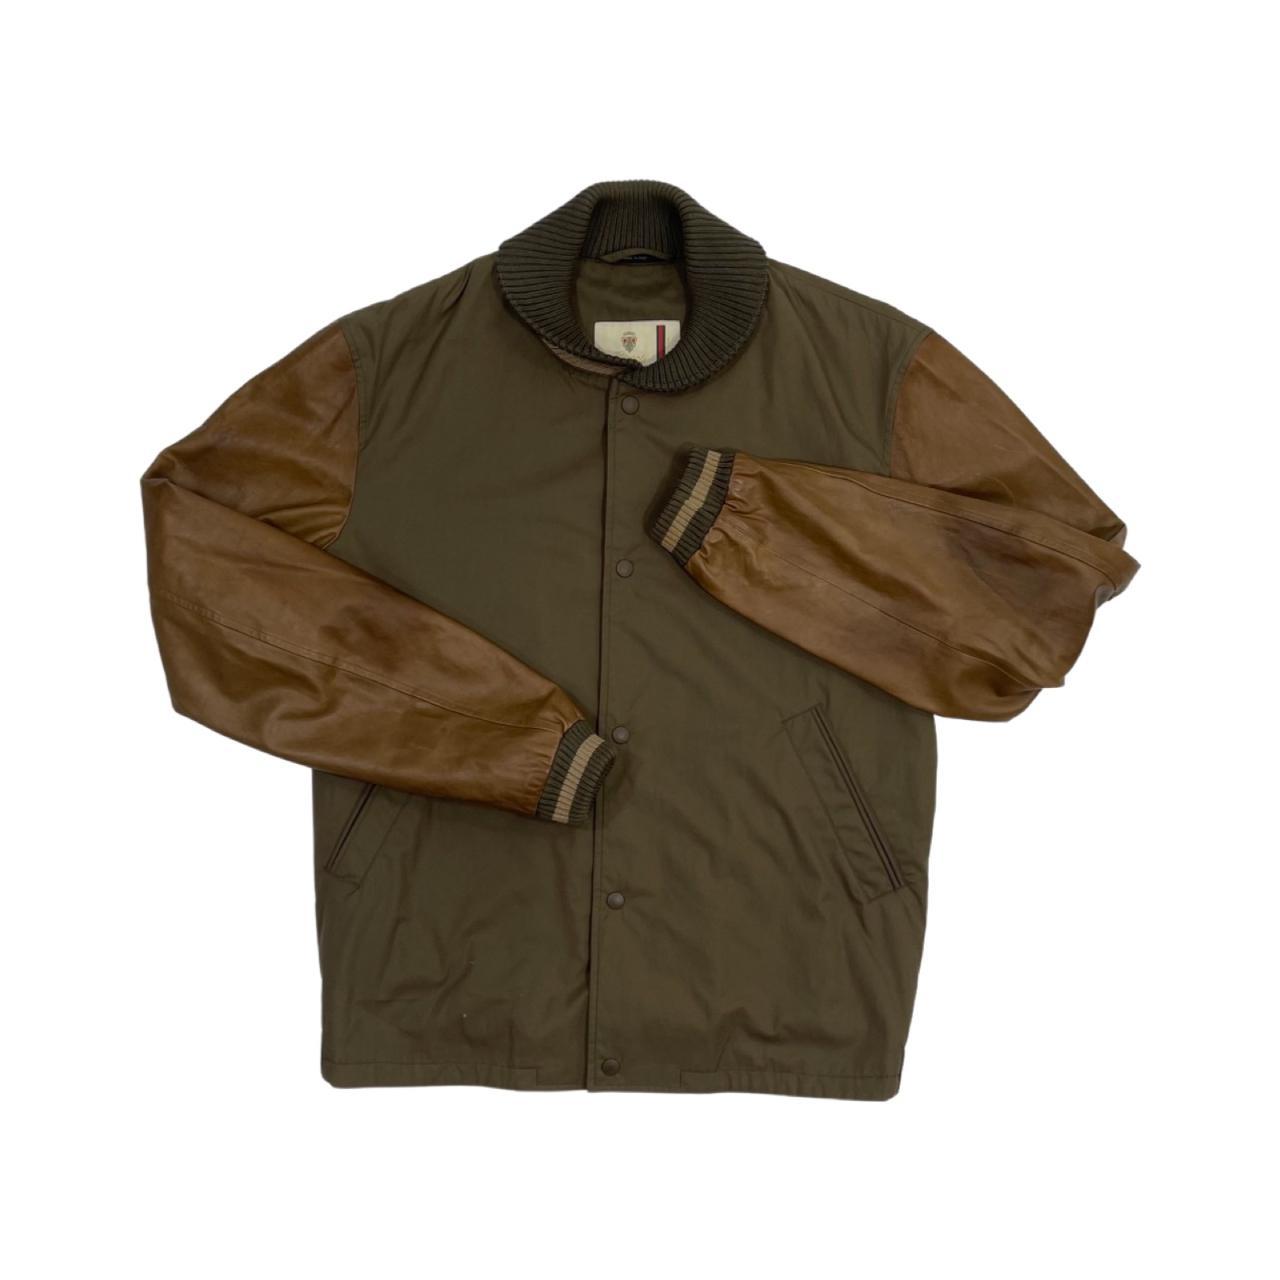 Gucci Men's Brown and Green Jacket